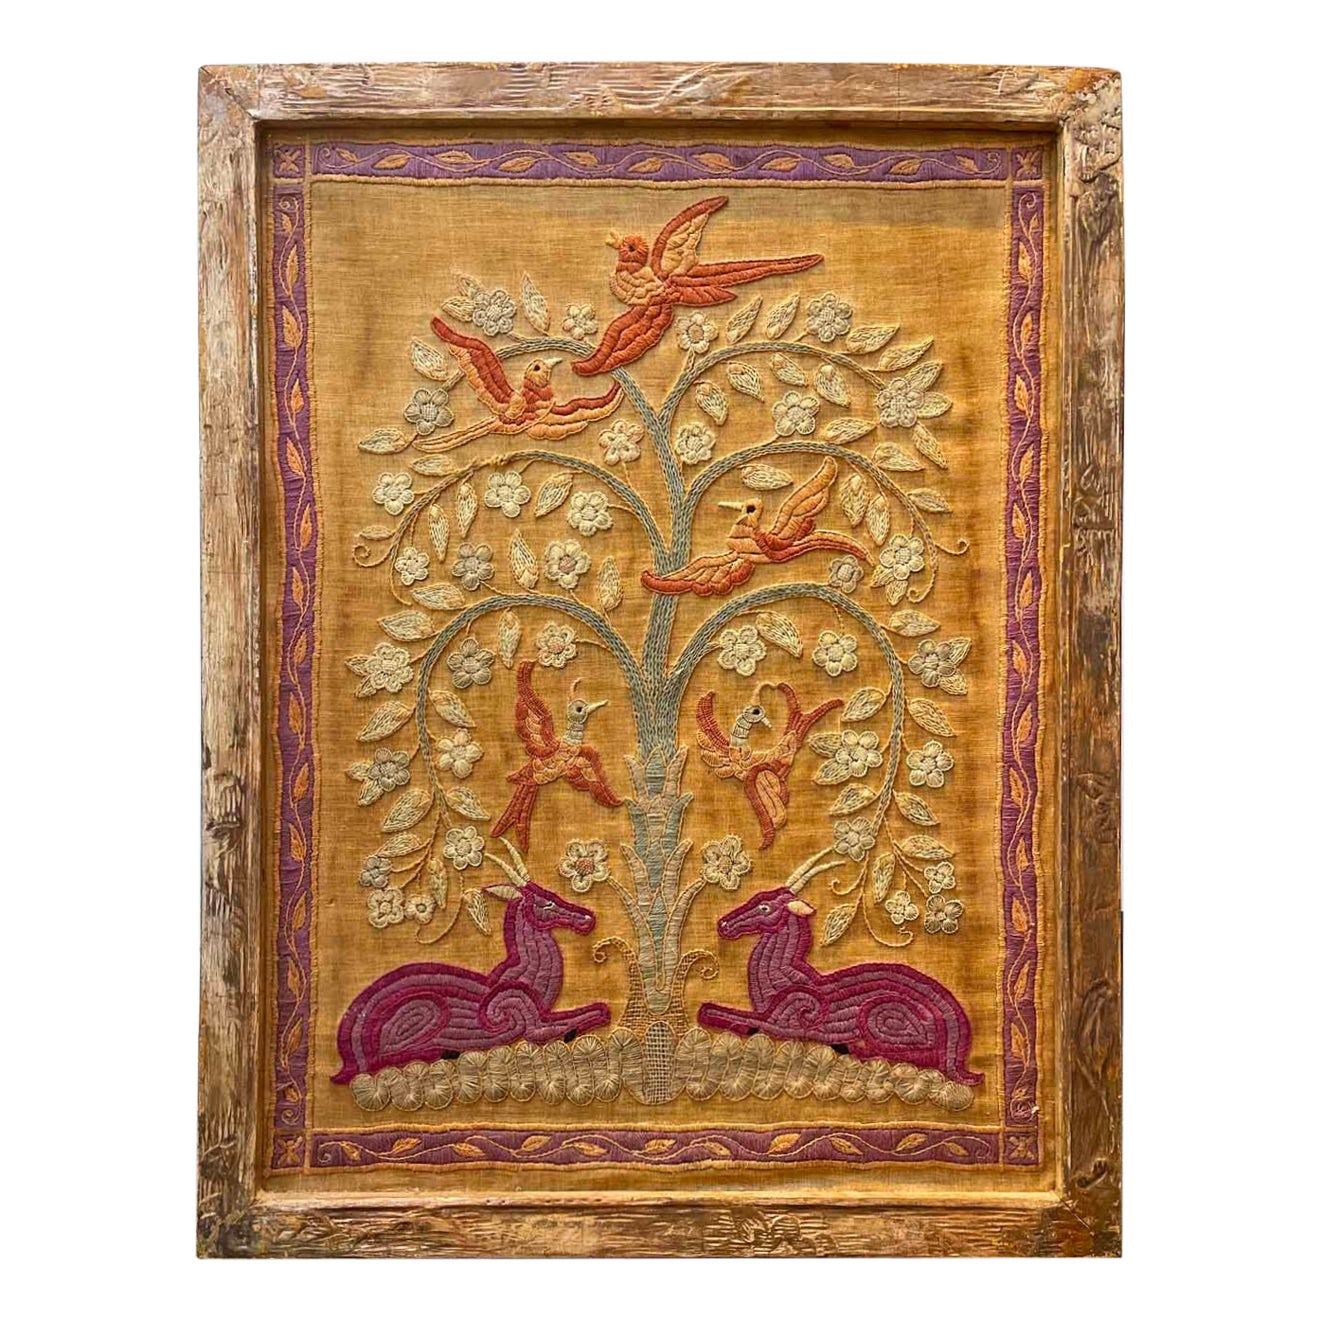 "Deer with Tree of Life", Art Deco-Modernist Embroidery in Deep Red and Green